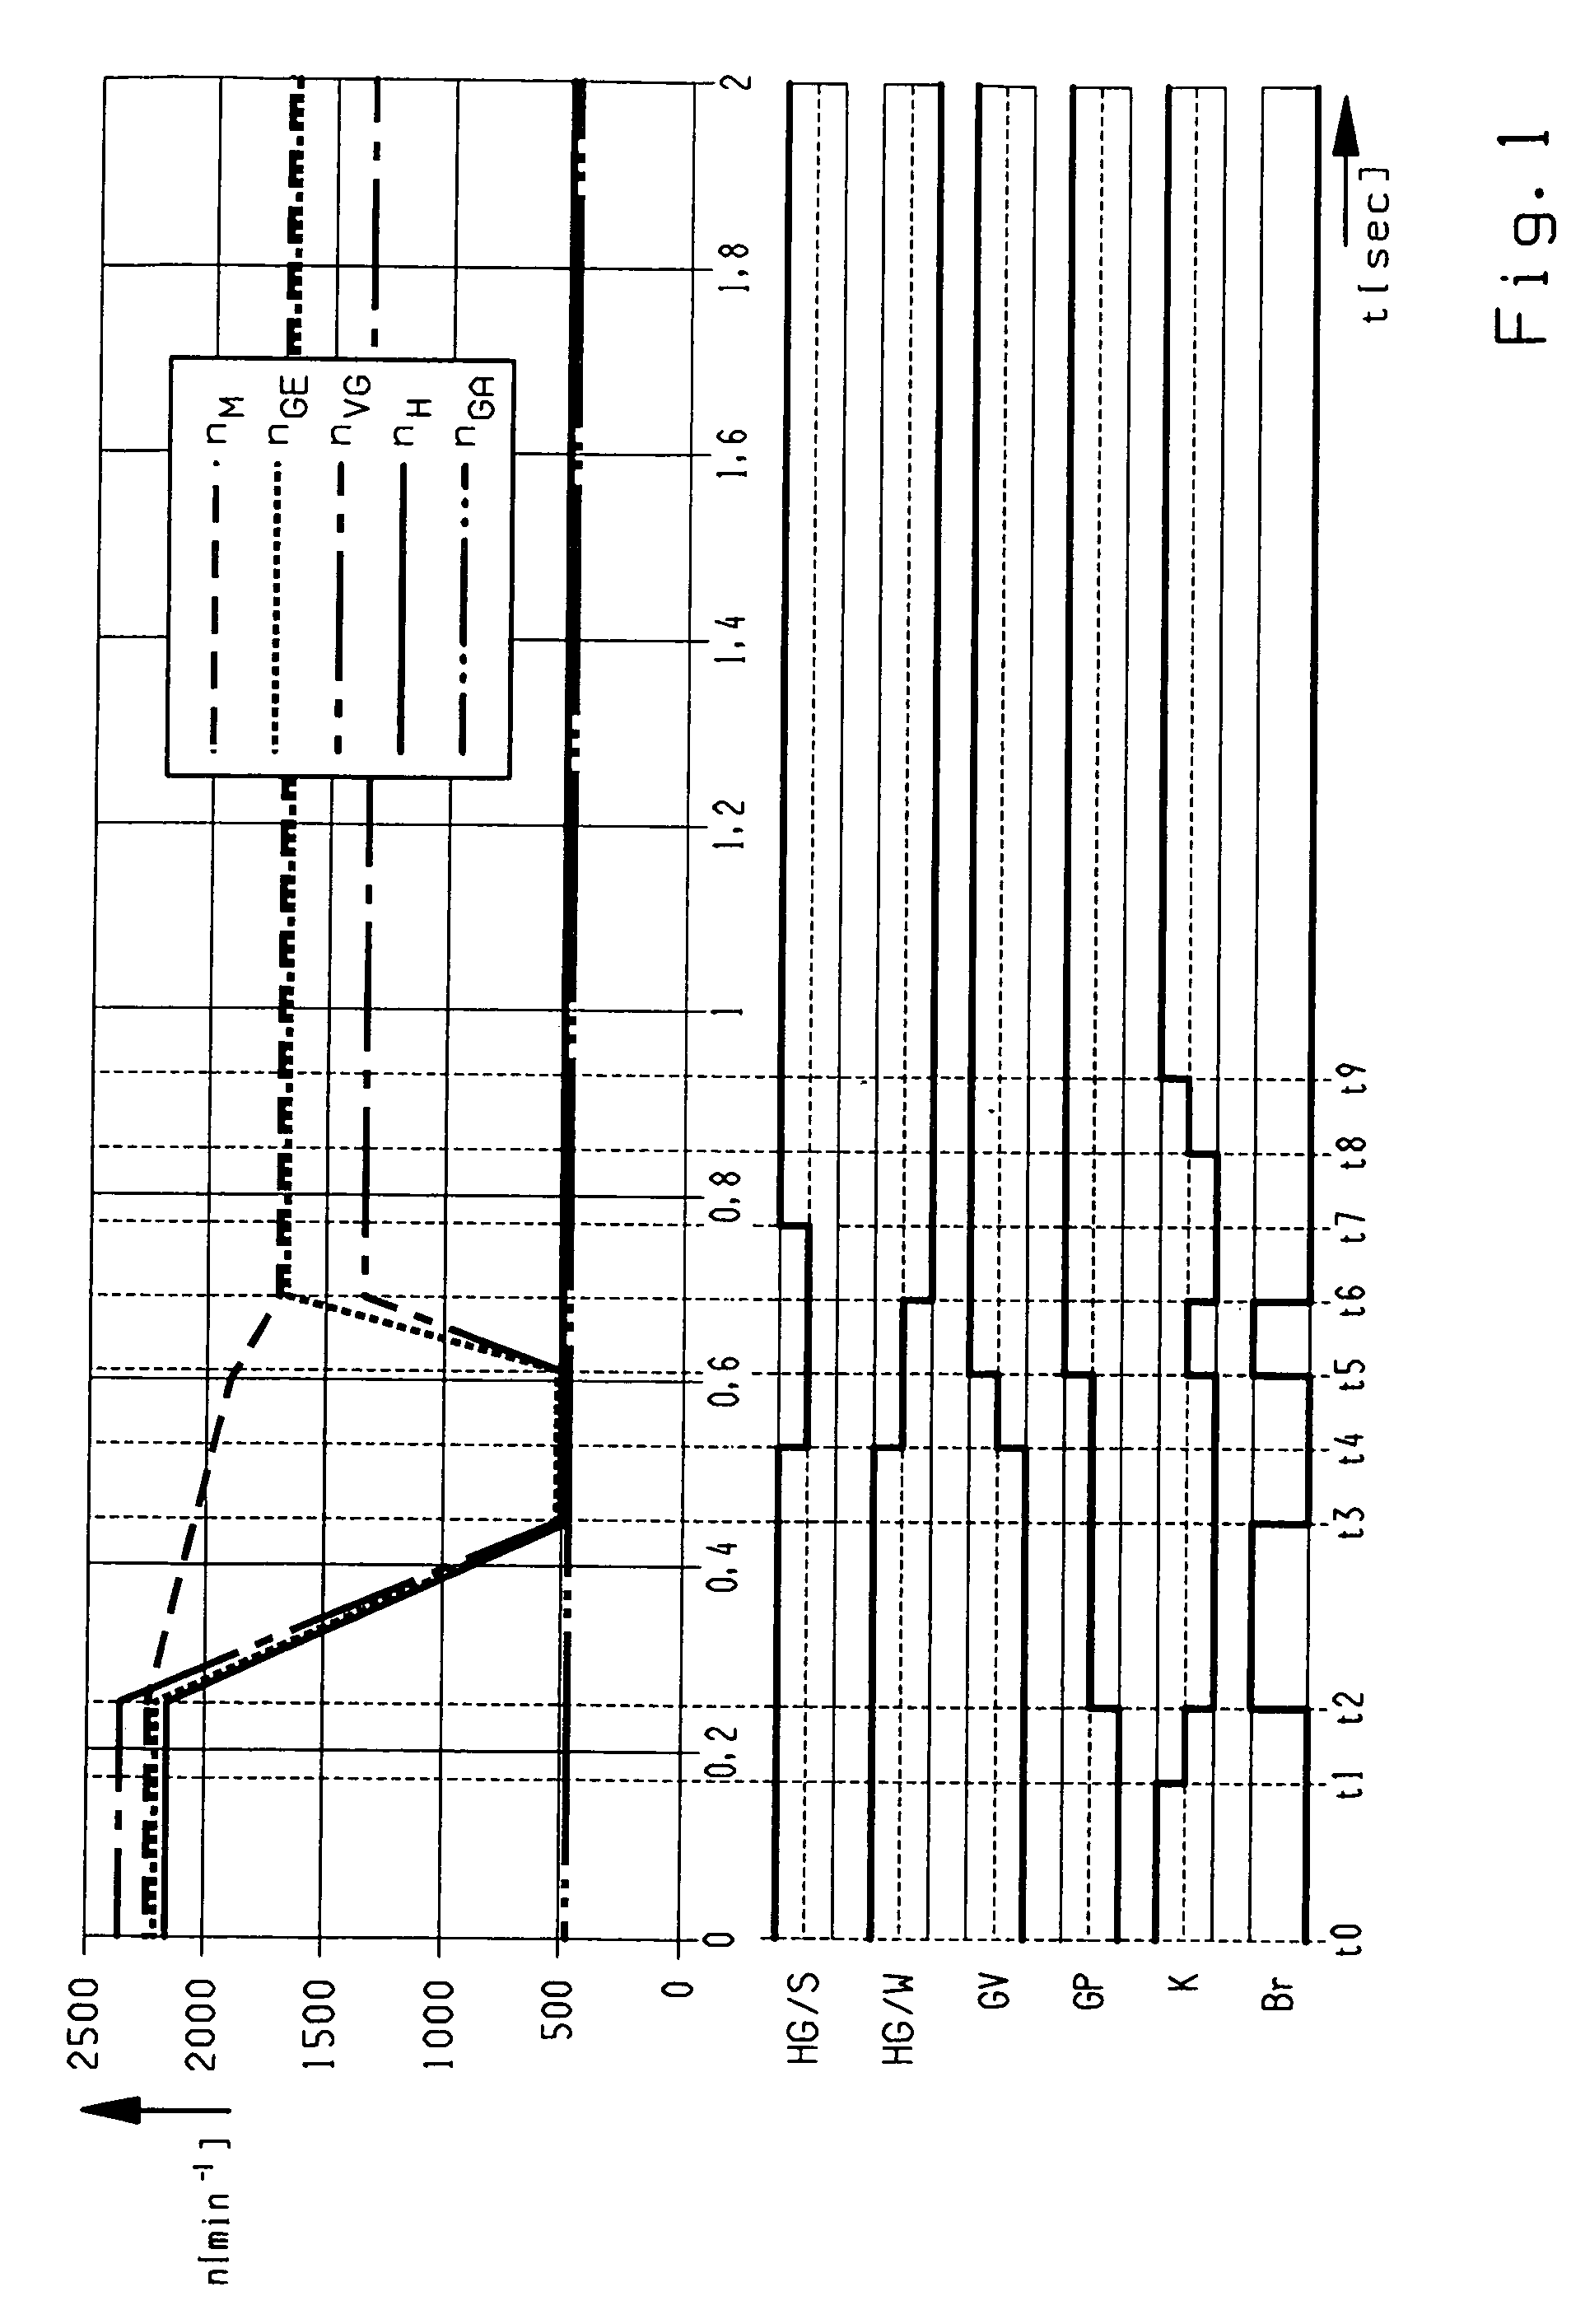 Method for shifting actuation of an automated transmission